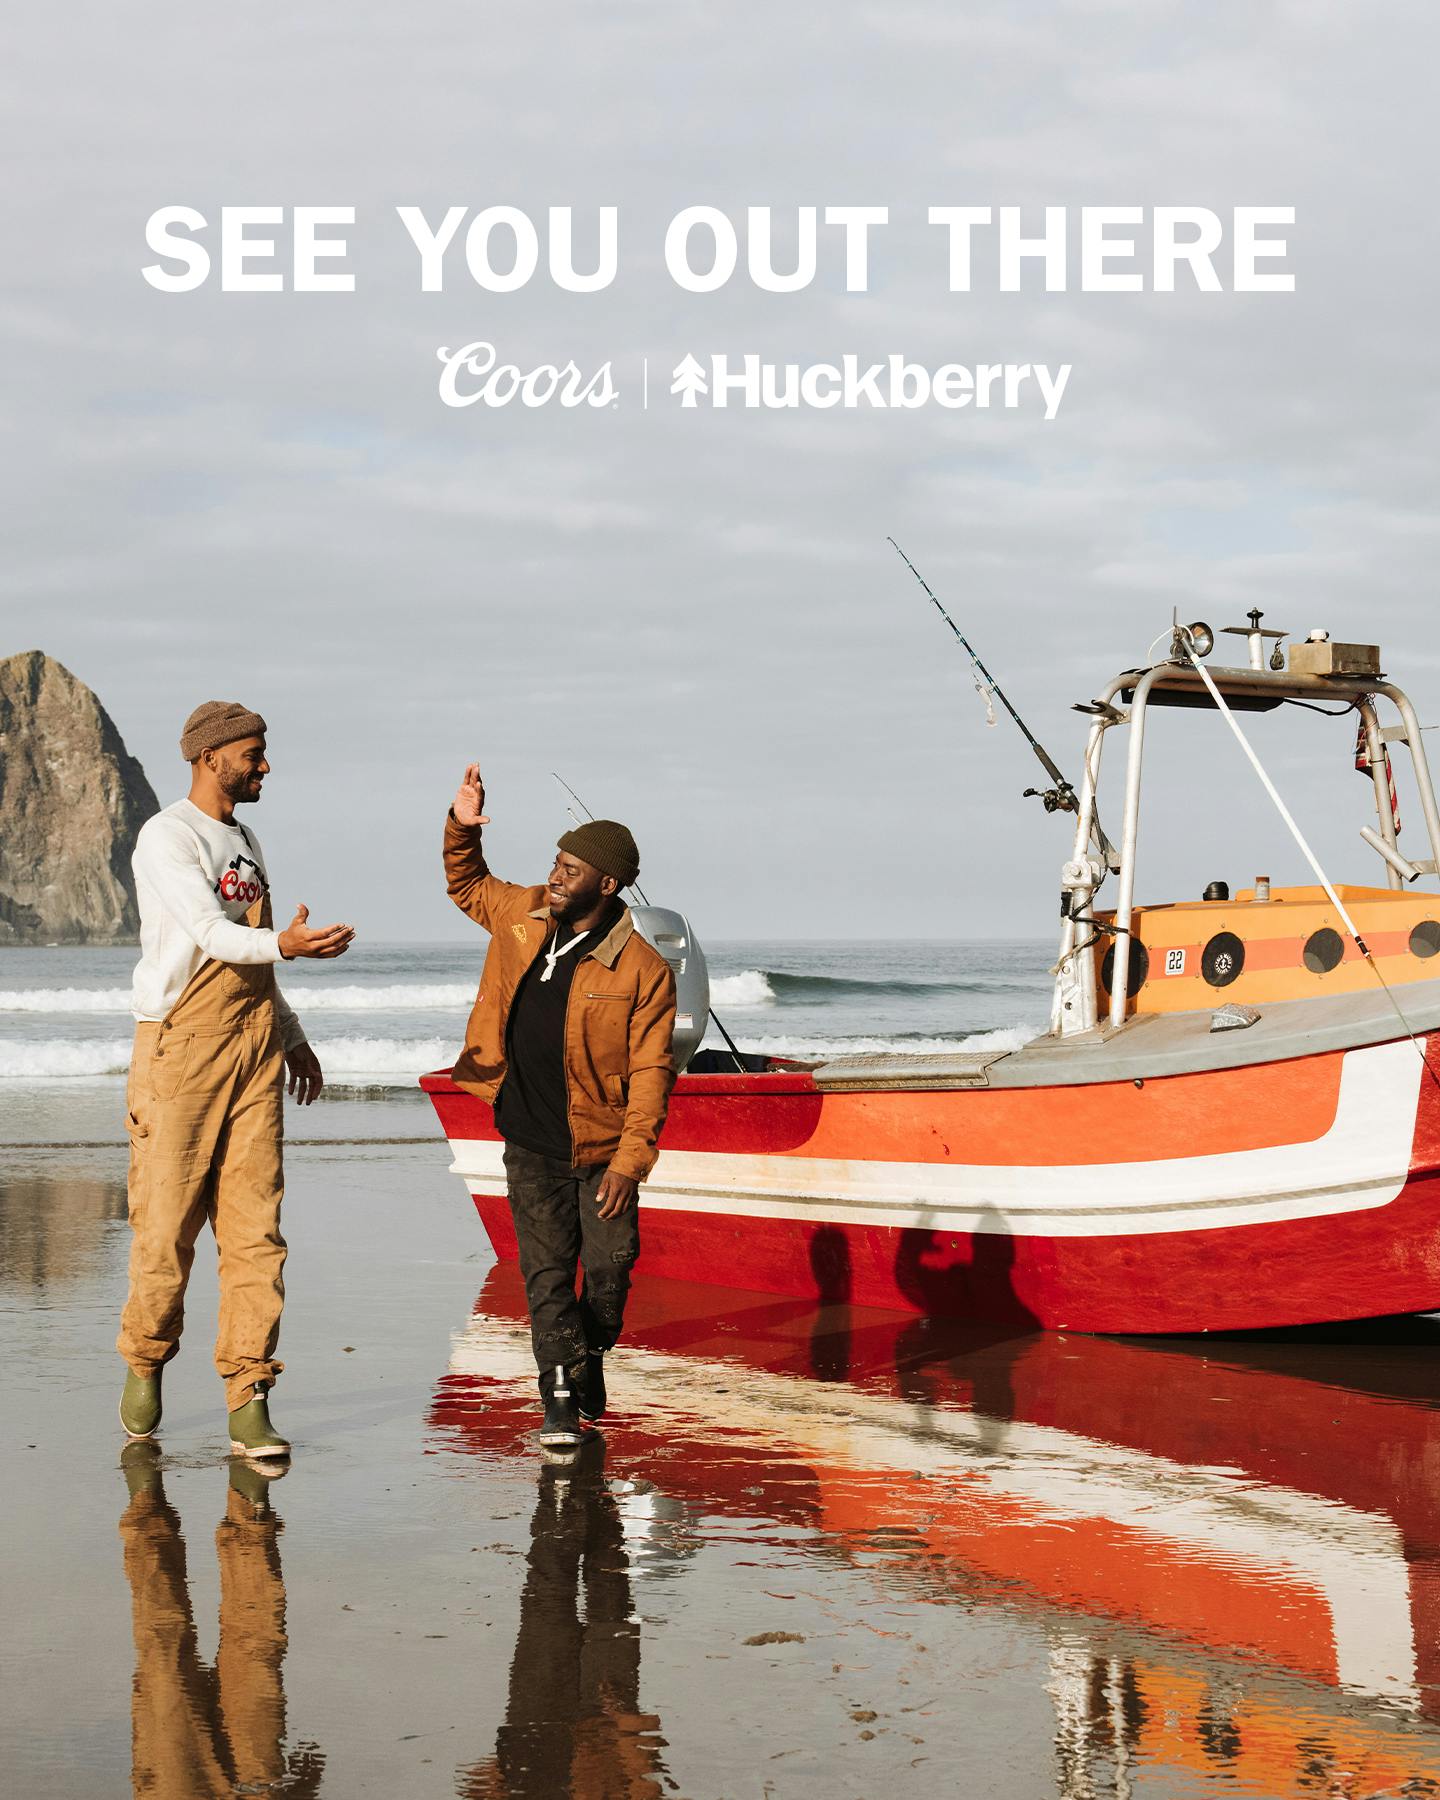 See You Out There text over image of men on beach